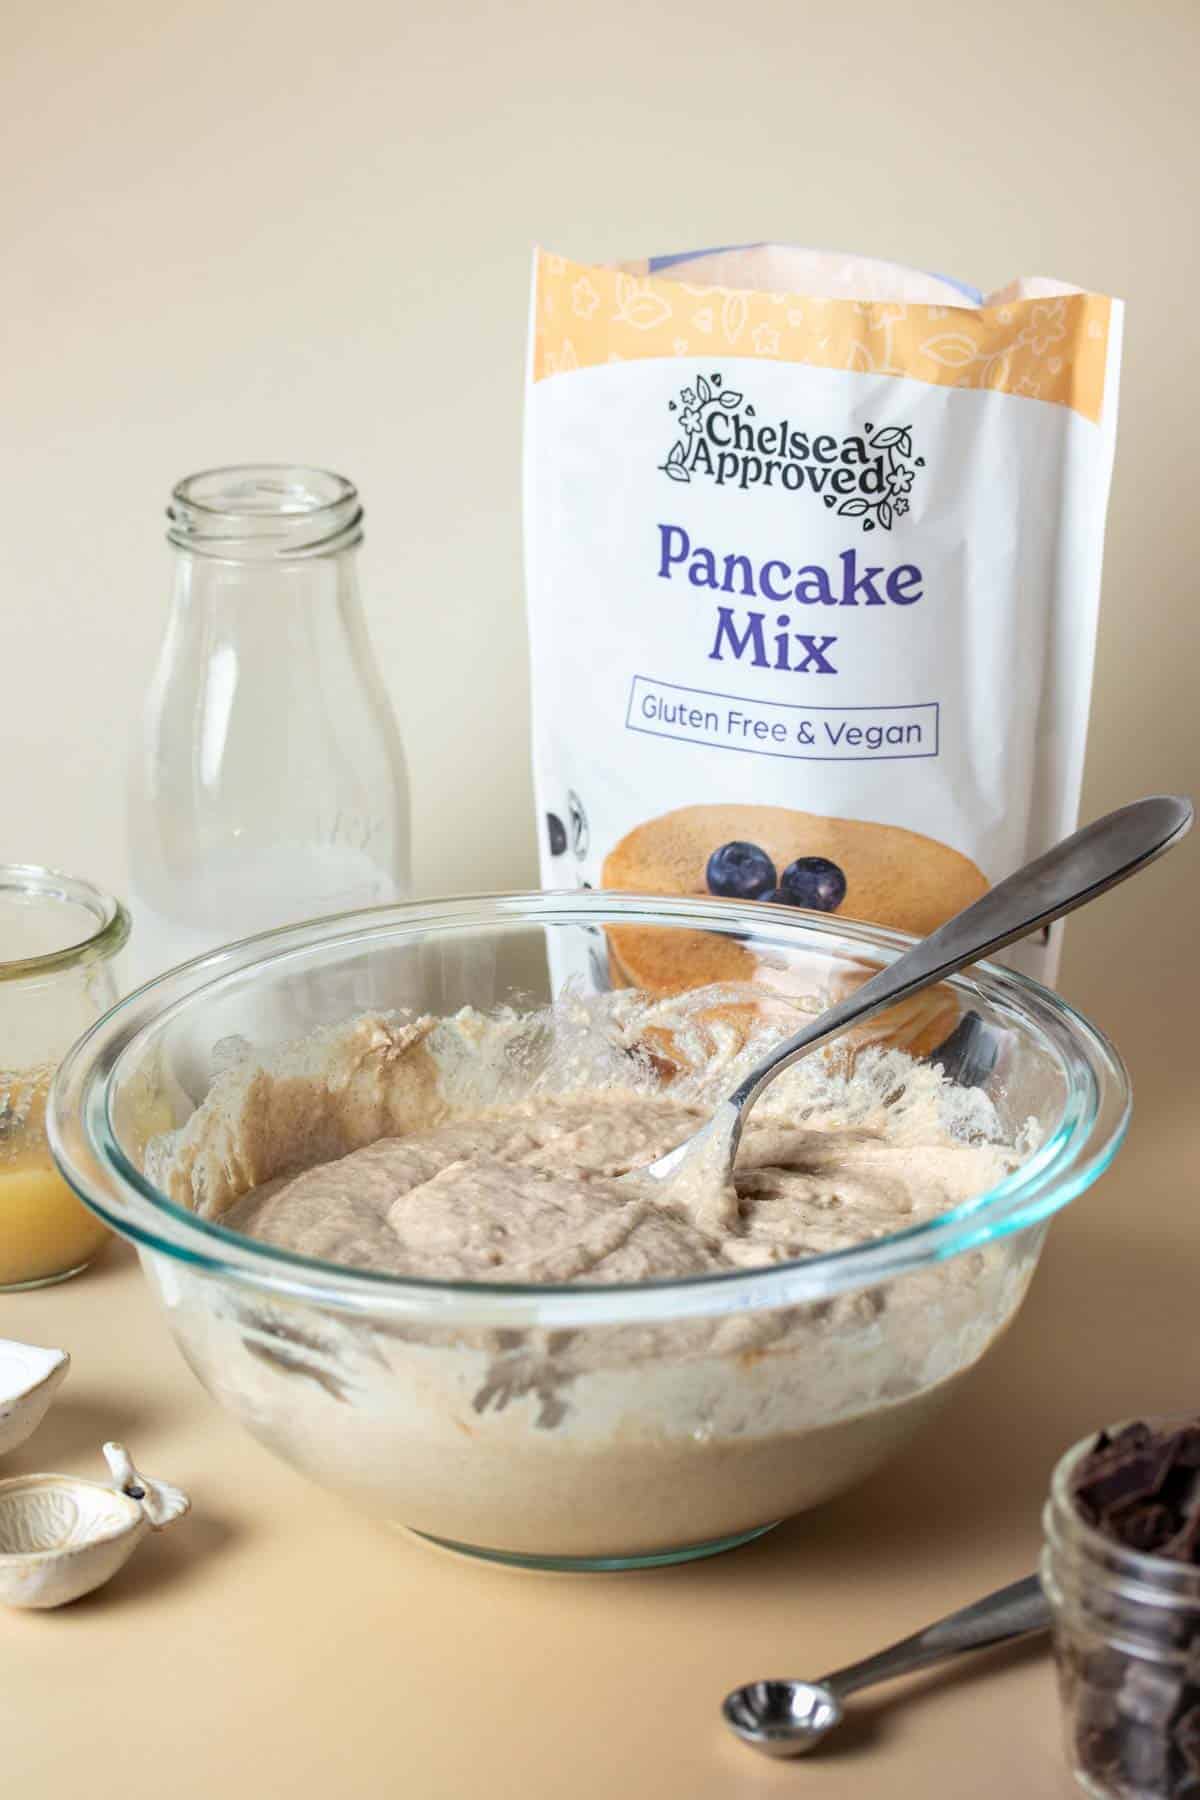 A pancake muffin batter in a glass bowl with a spoon in it in front of a bag of pancake mix and other ingredients used.